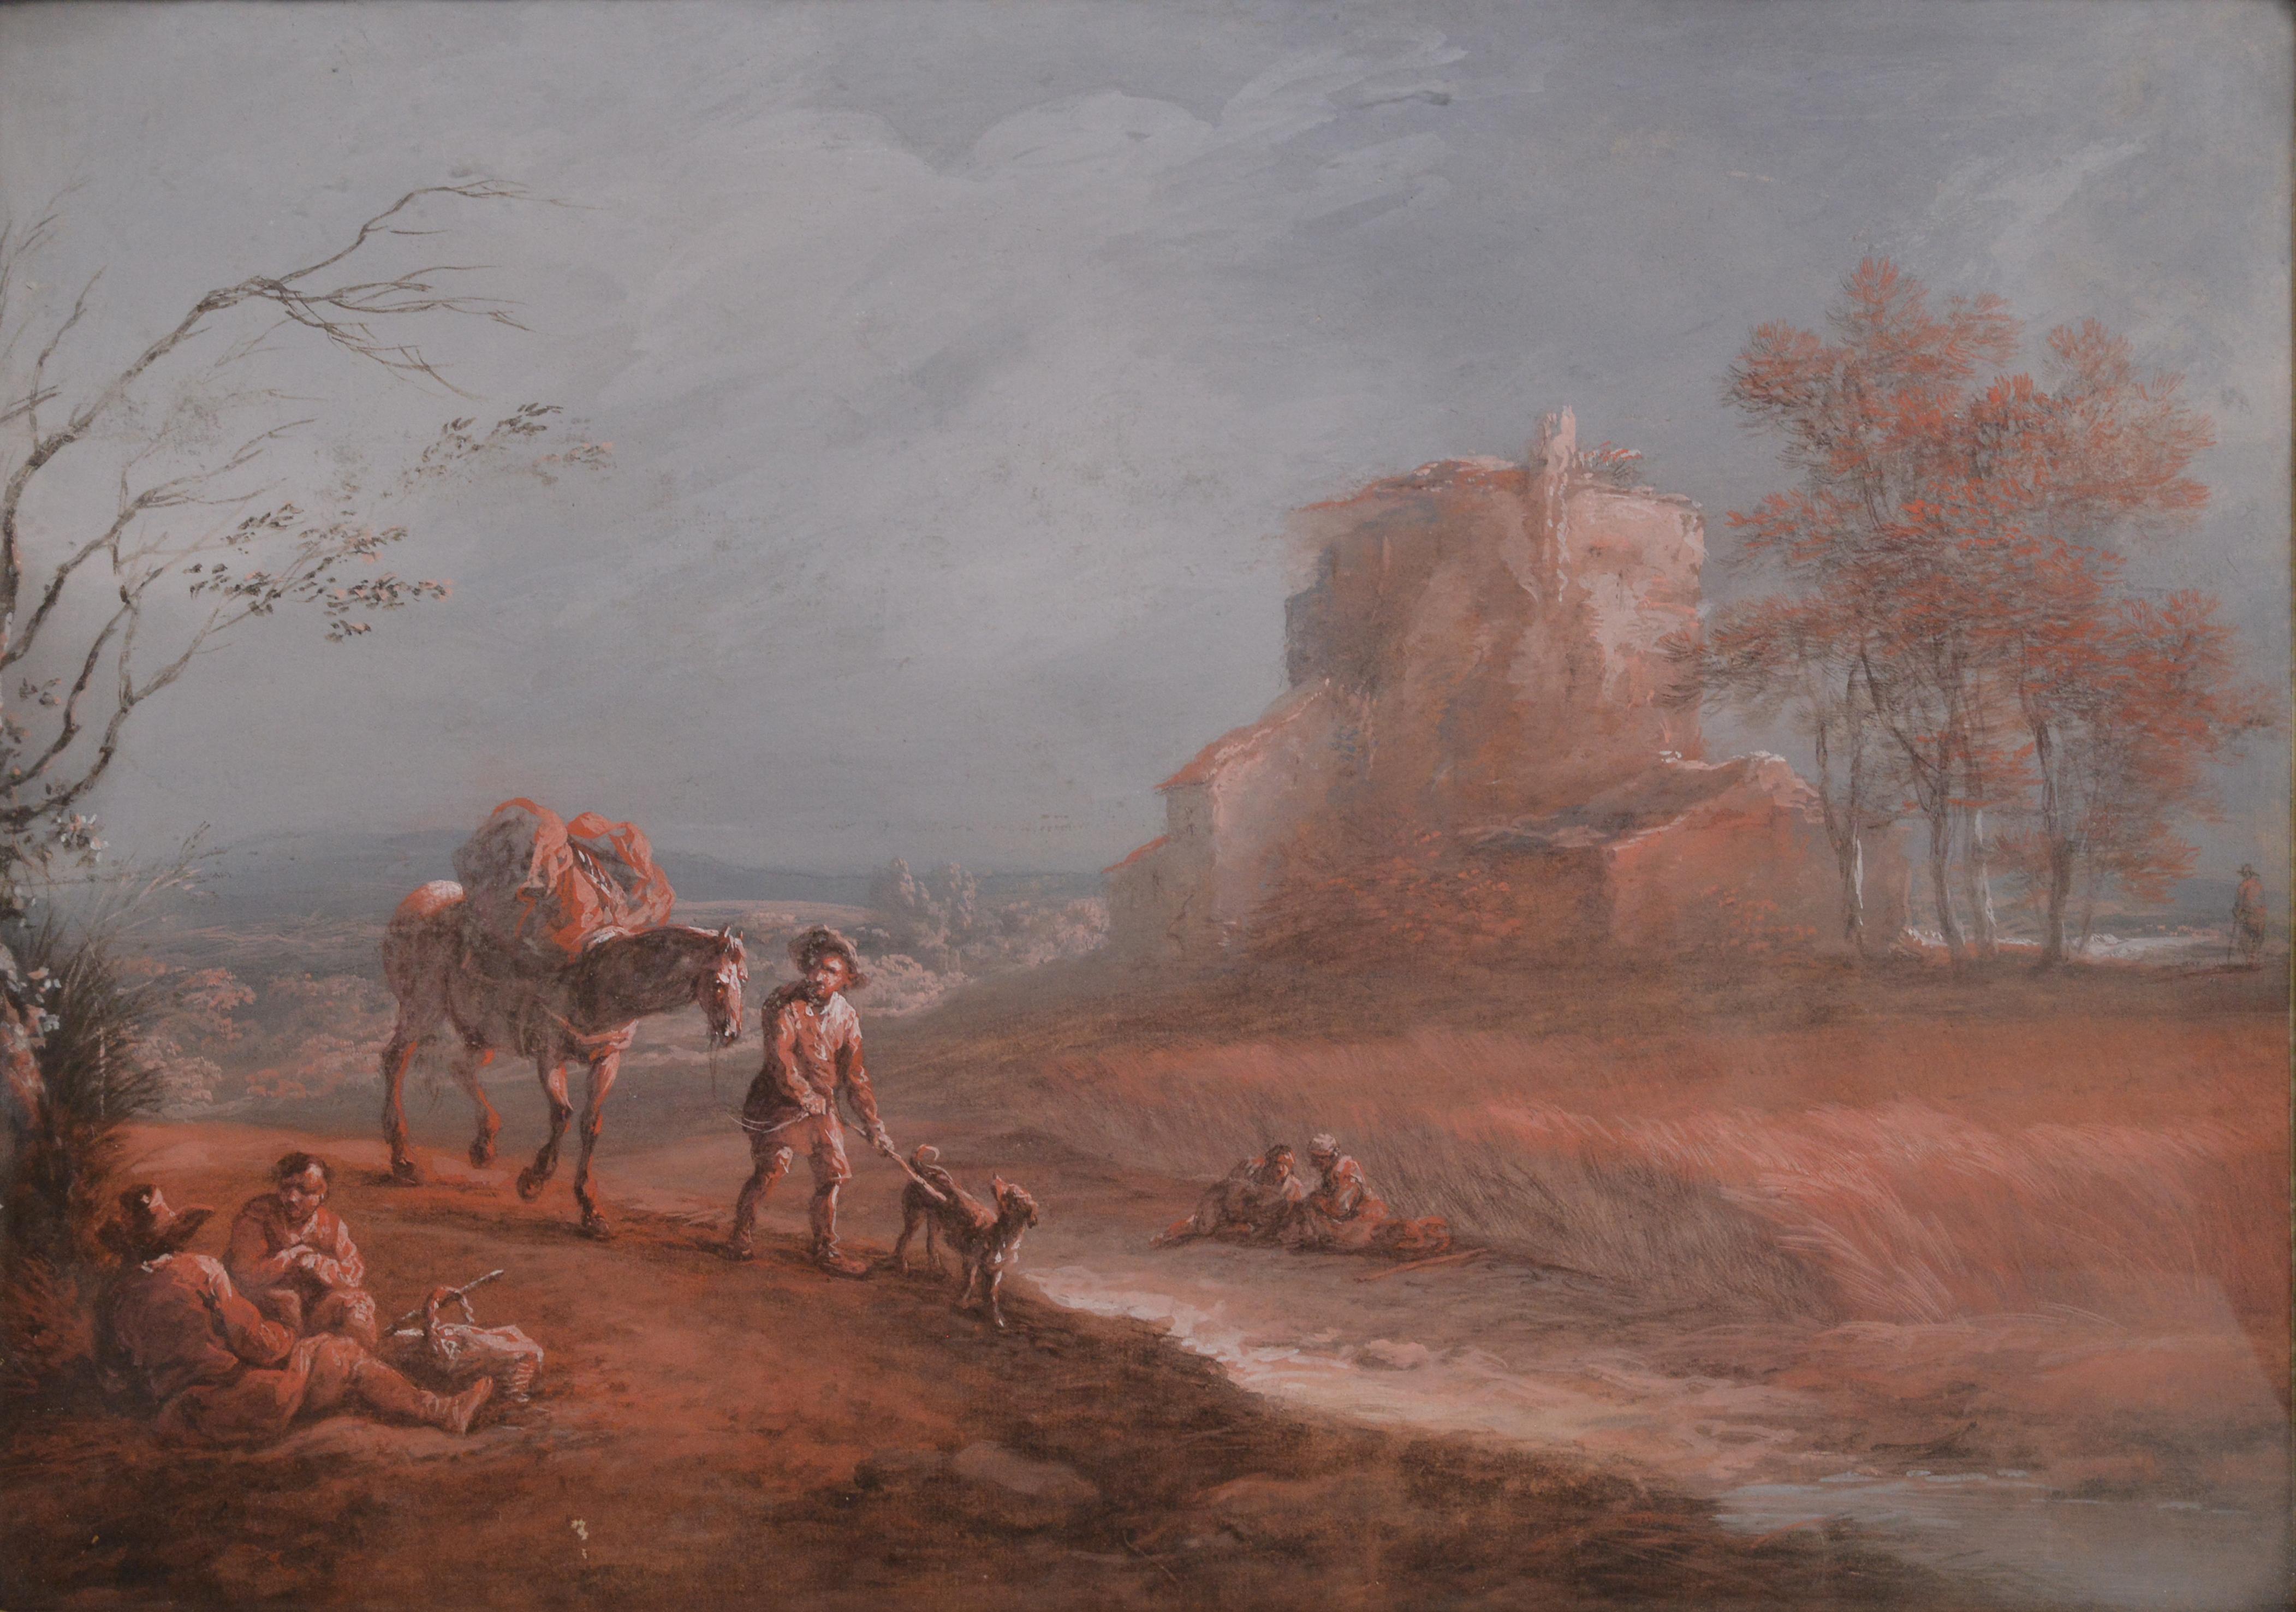 Pair of Grisaille paintings Rustic scenes 18th century French Rococo Master - Brown Landscape Painting by Jean-Baptiste Pillement